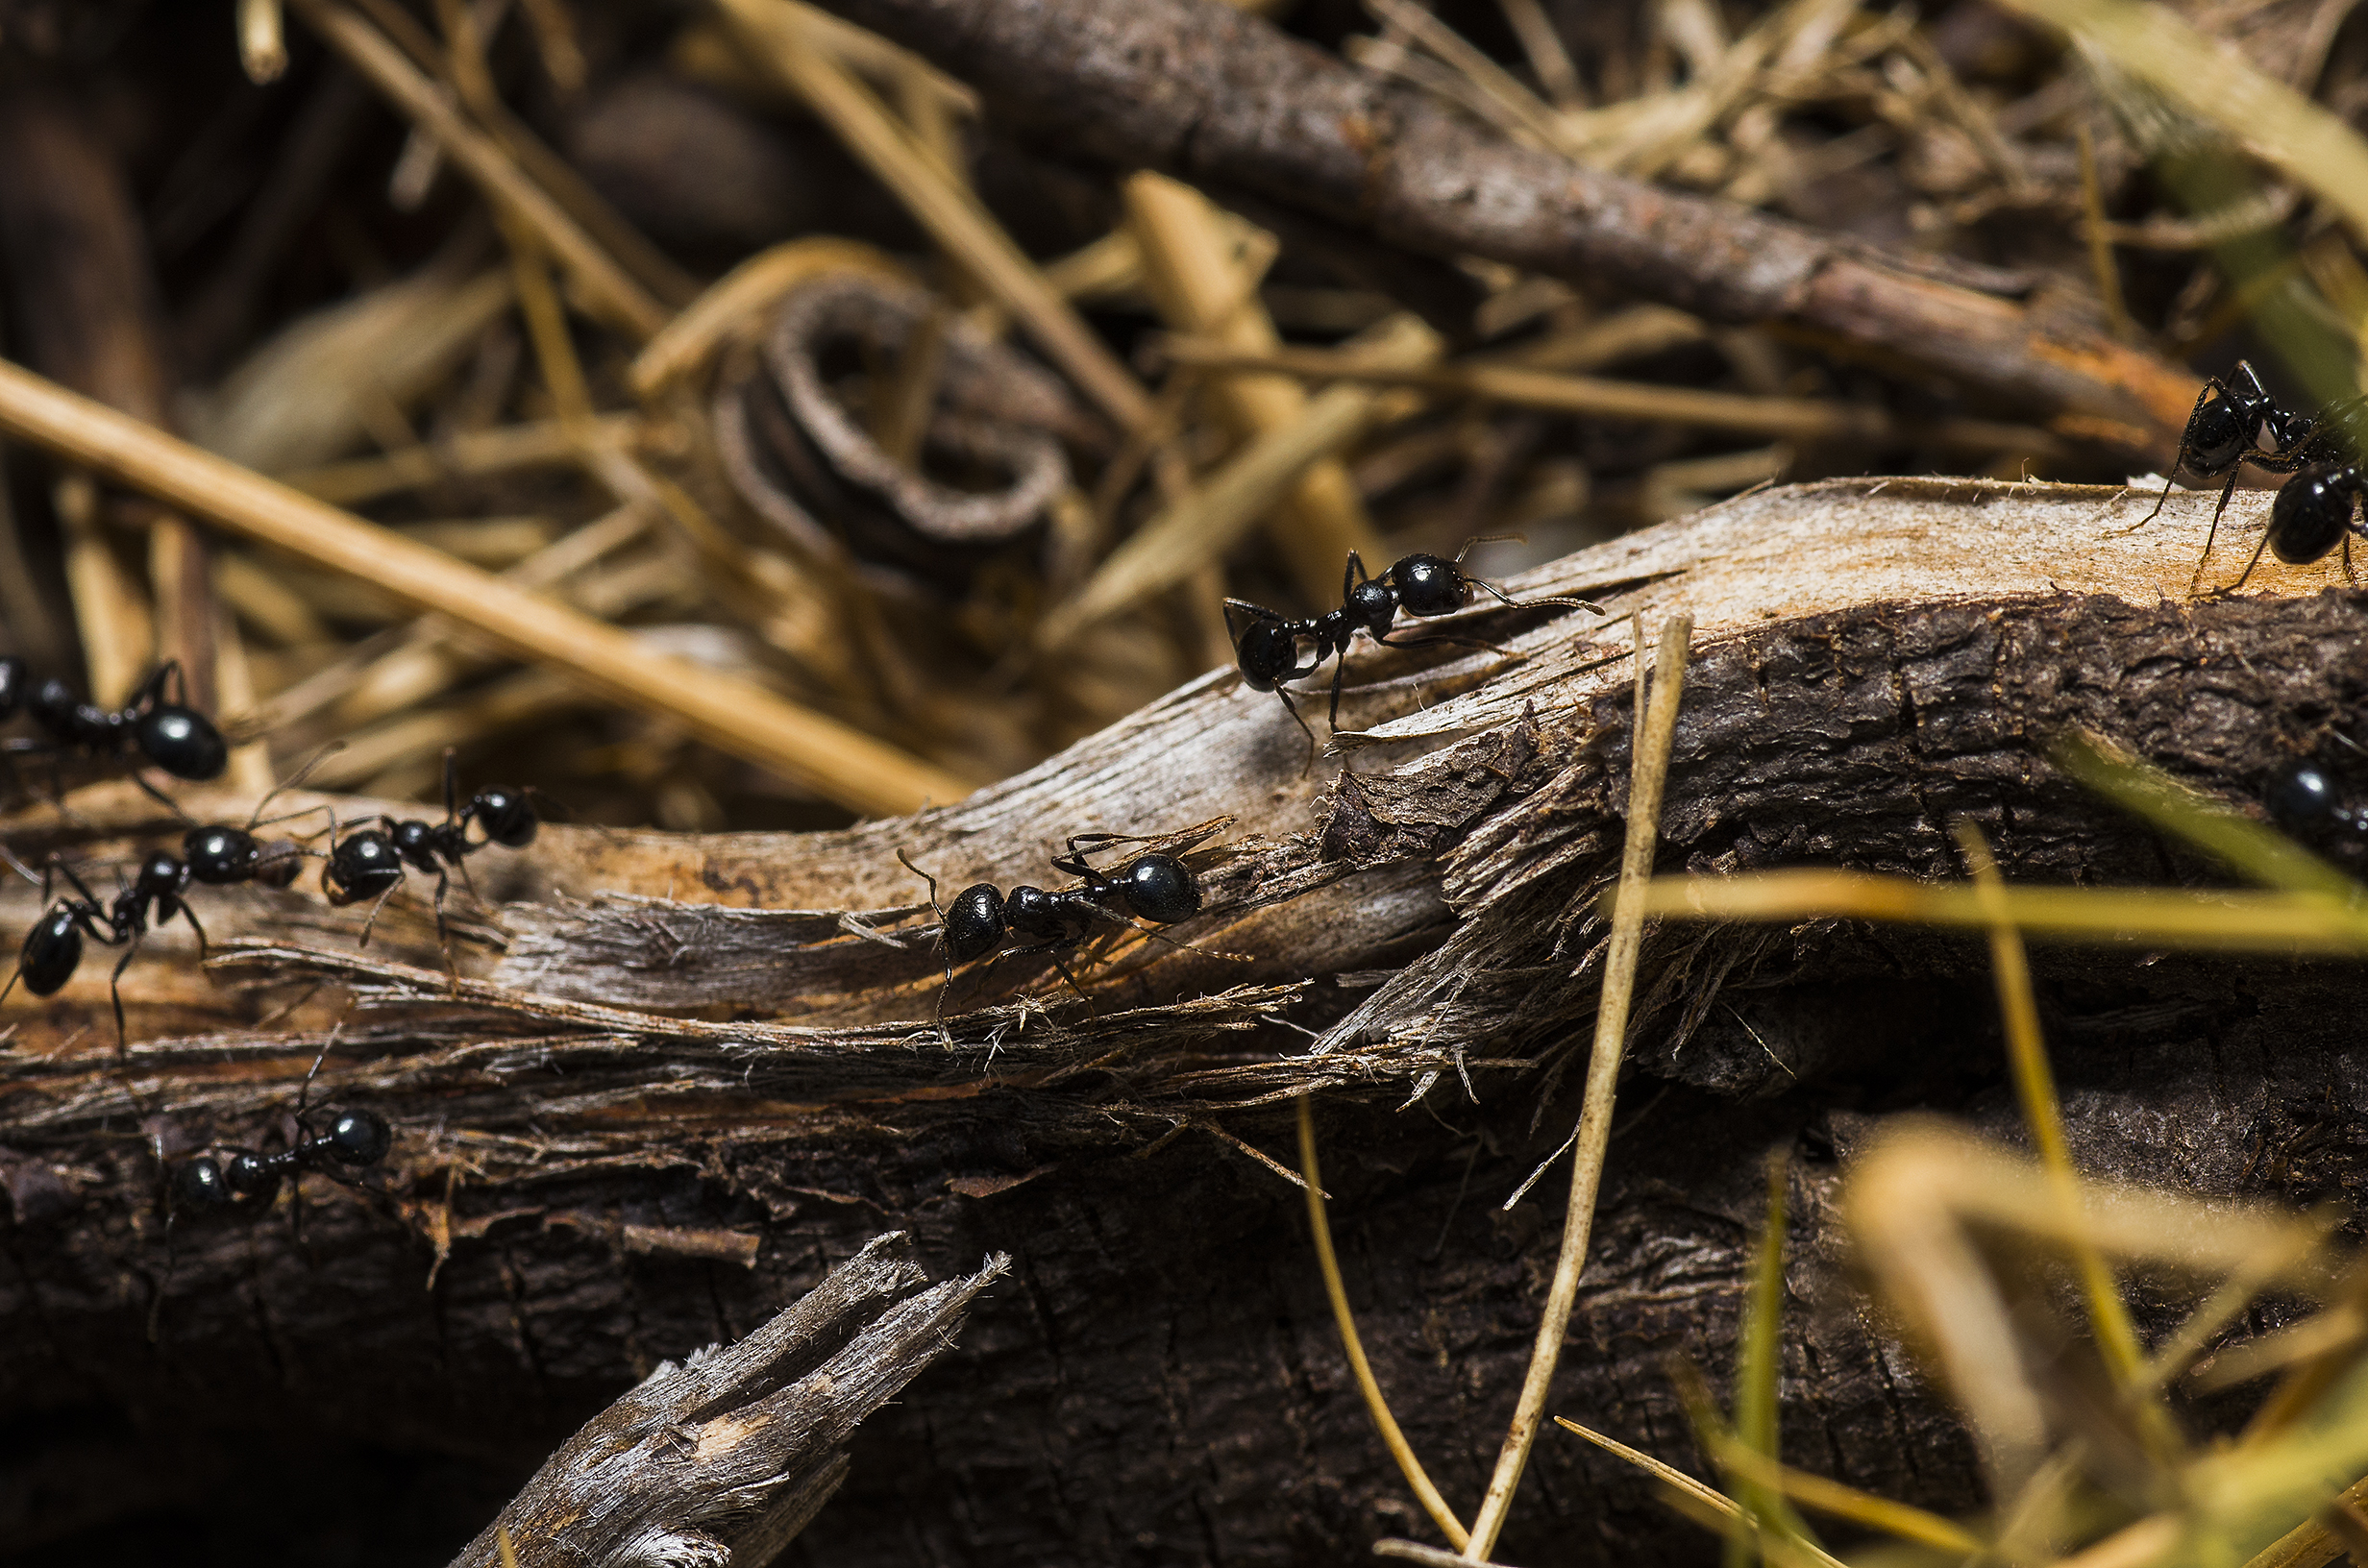 Health and Behavioral Development of Beneficial Black Garden Ants Stunted  by Low Levels of Pesticide Exposure in Soils - Beyond Pesticides Daily News  Blog